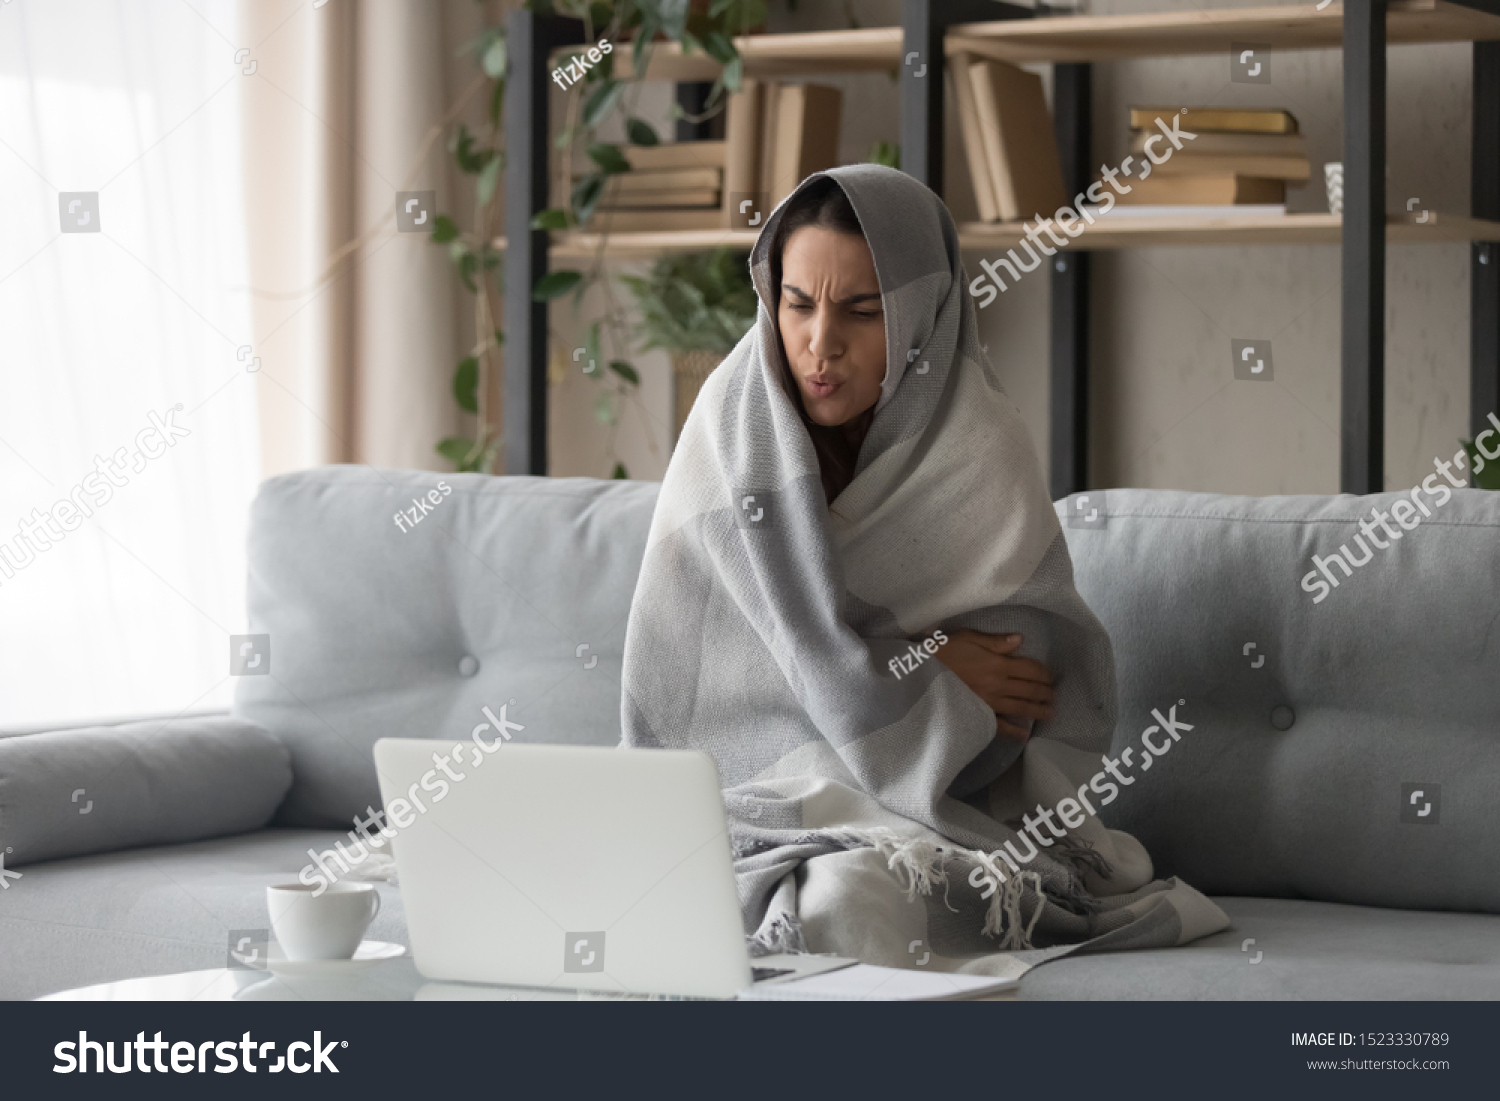 Sick ill young woman feel cold covered with blanket sit on sofa watching movie on laptop, annoyed girl shiver freezing warming at home wrapped with plaid, no central heating problem and flu concept #1523330789